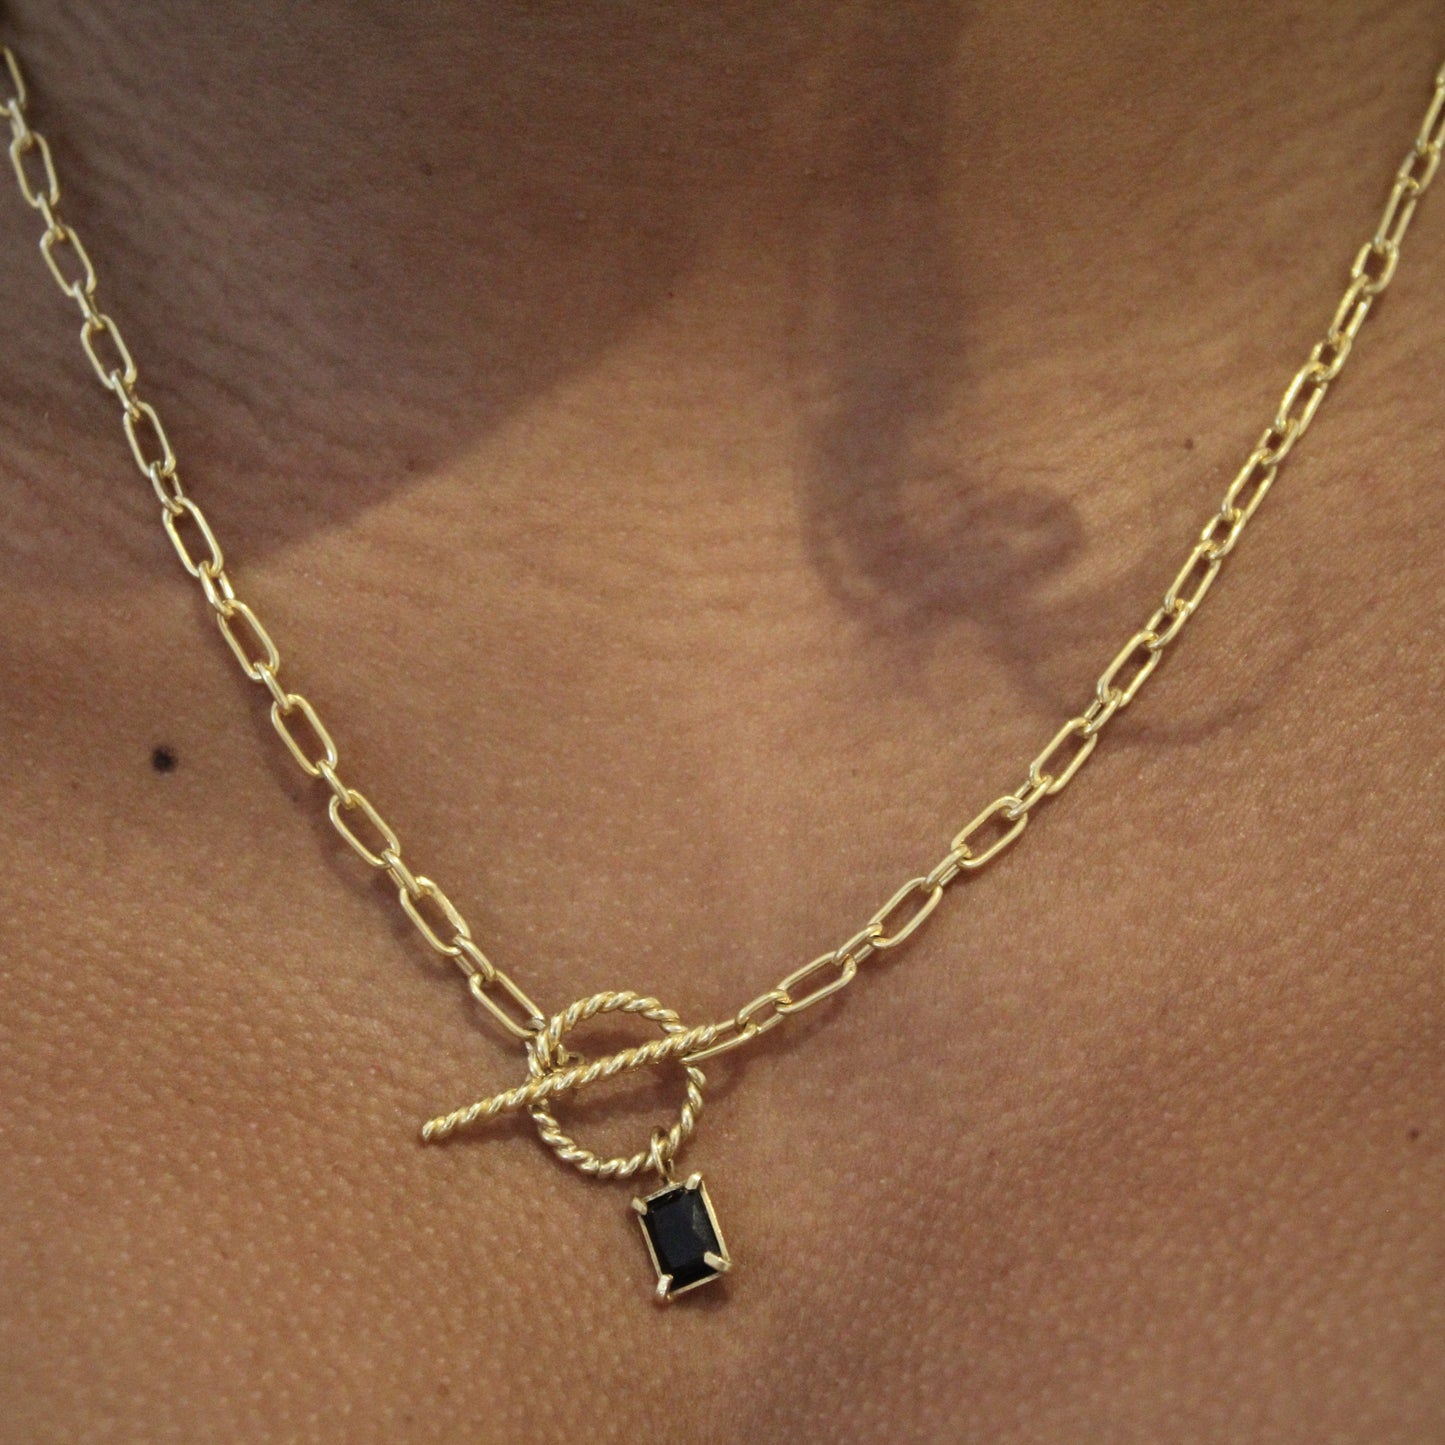 The Onyx Stone Link Necklace - you by me.